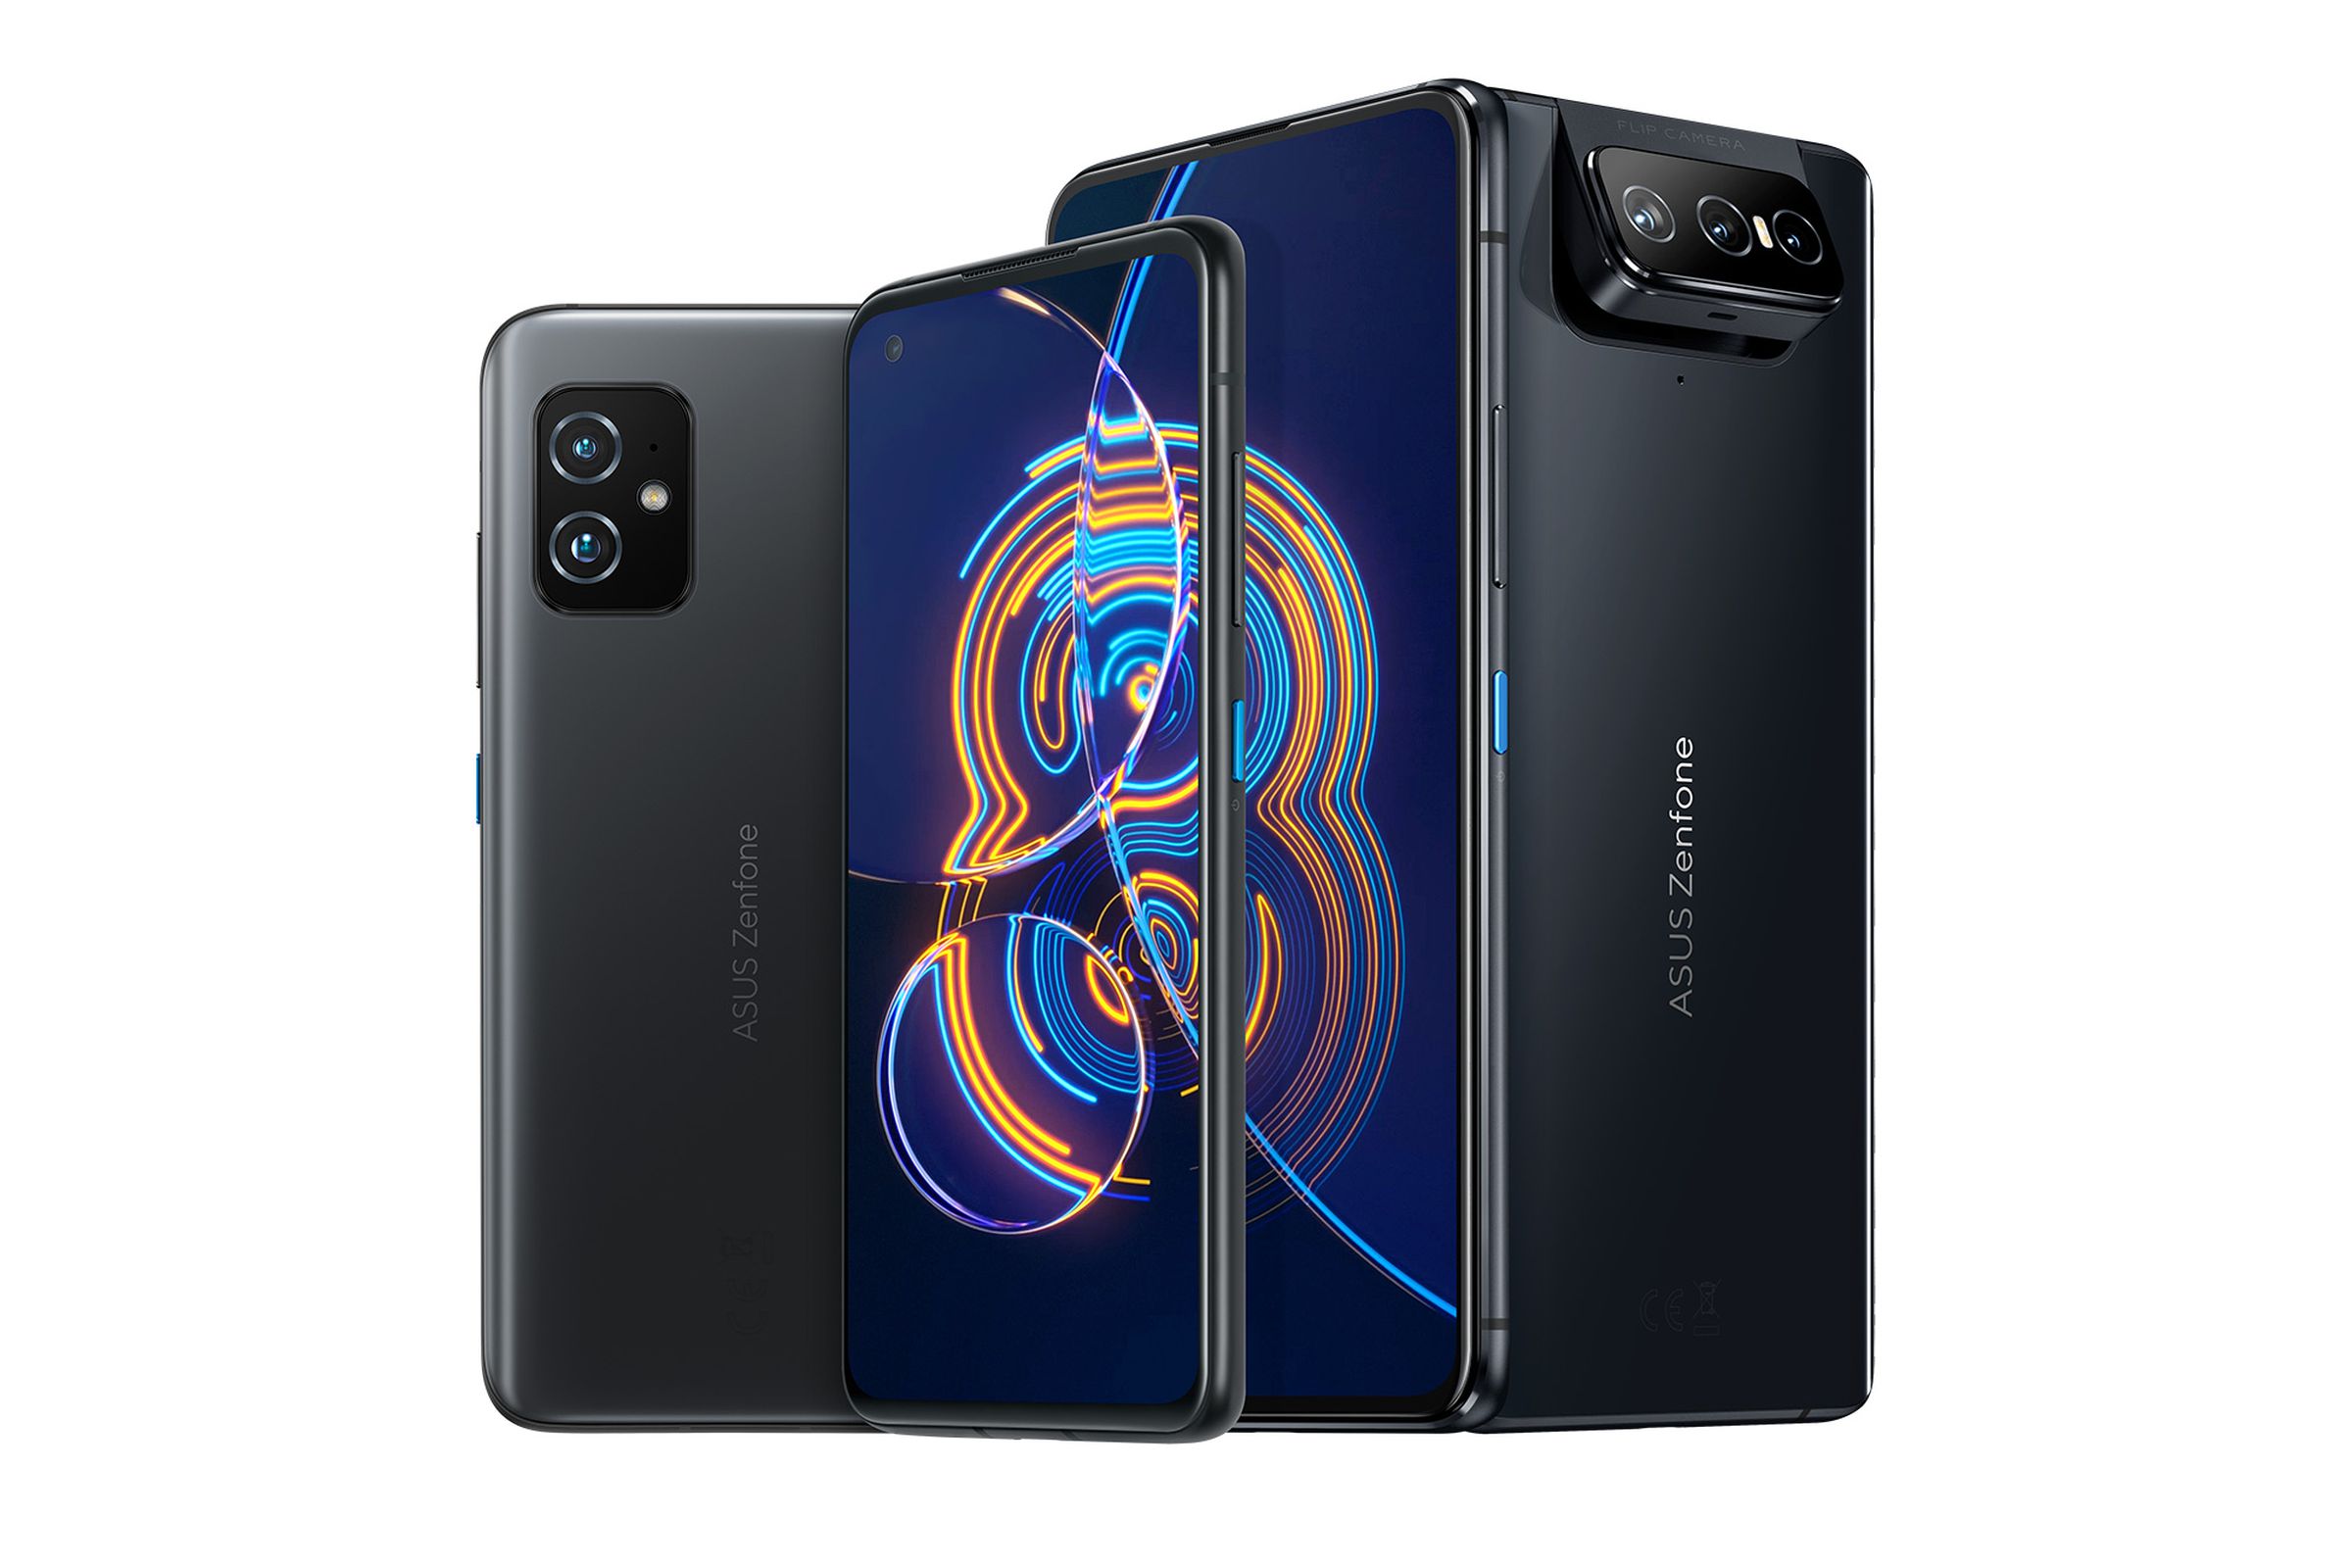 The larger, pricier ZenFone 8 Flip includes a camera module that rotates forward for selfies.